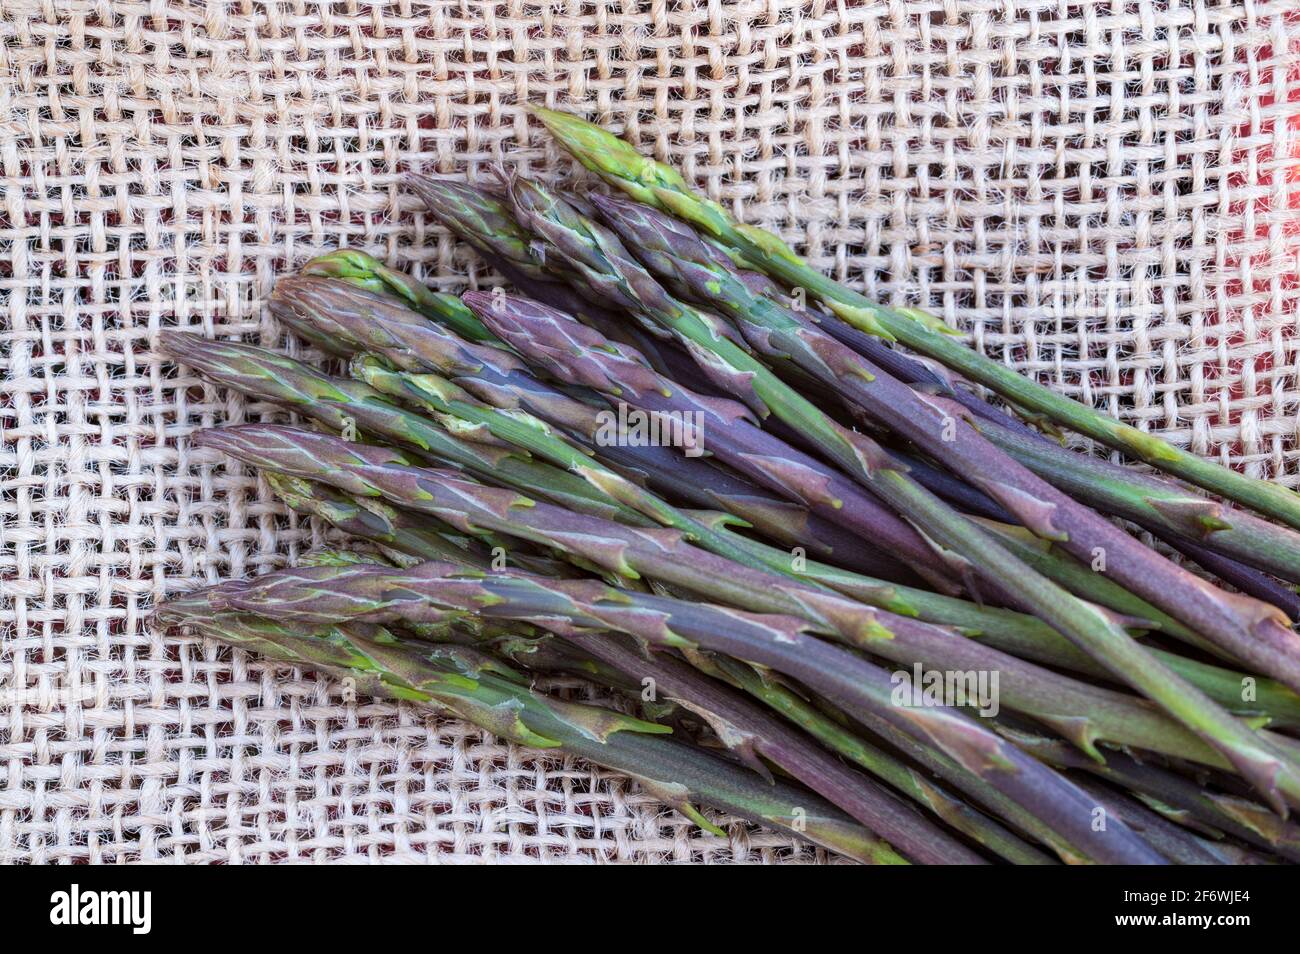 Freshly picked wild asparagus ready for use laid on a sackcloth base Stock Photo